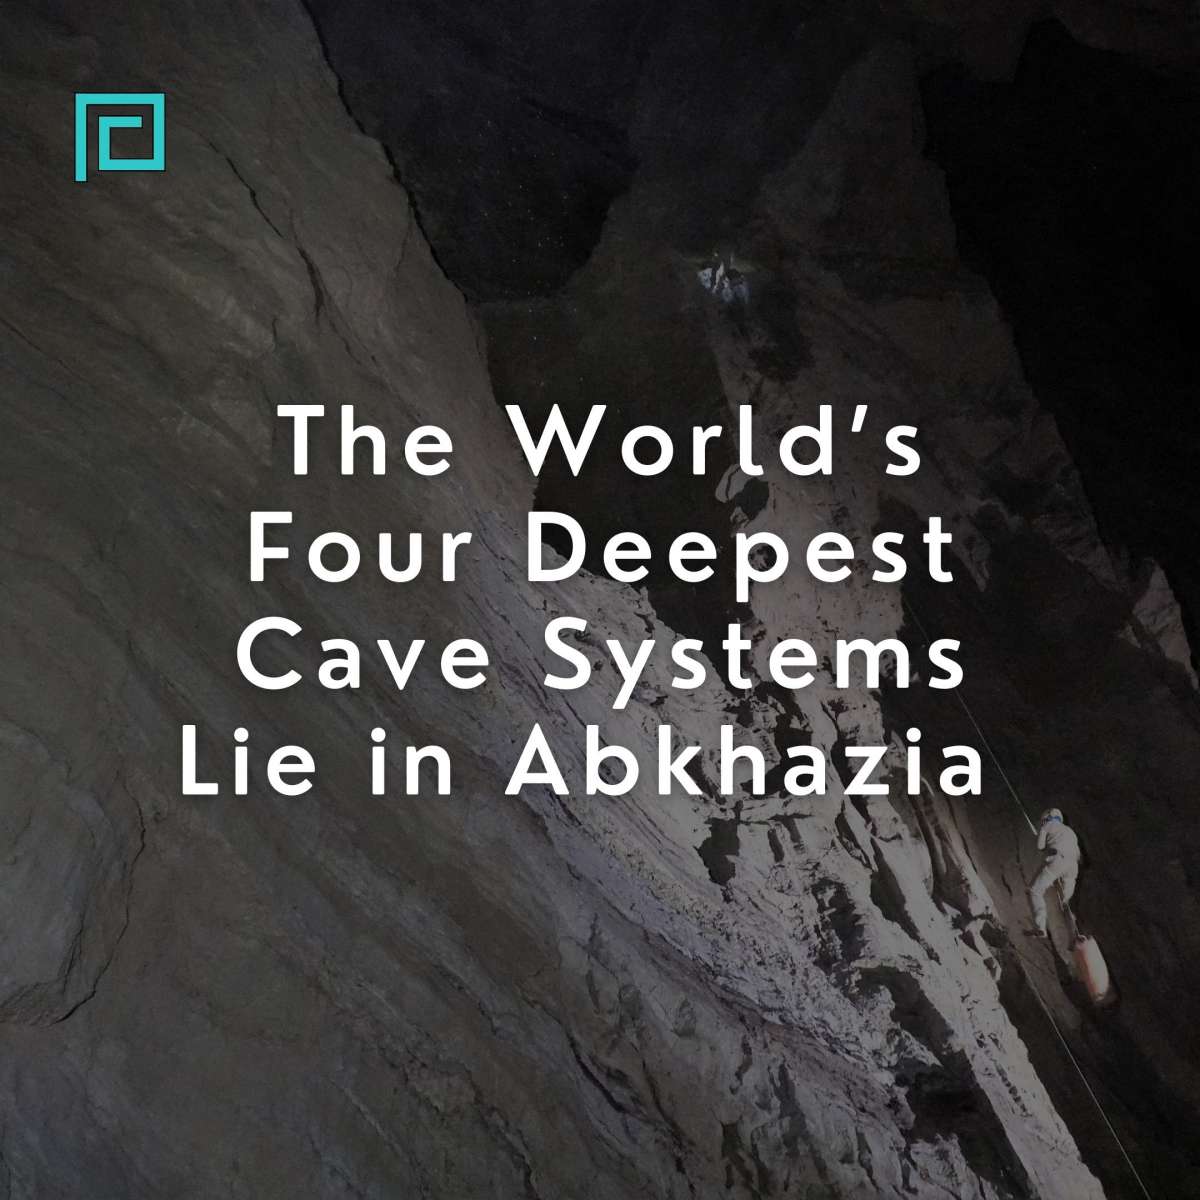 The world’s Four Deepest Cave Systems Lie in Abkhazia